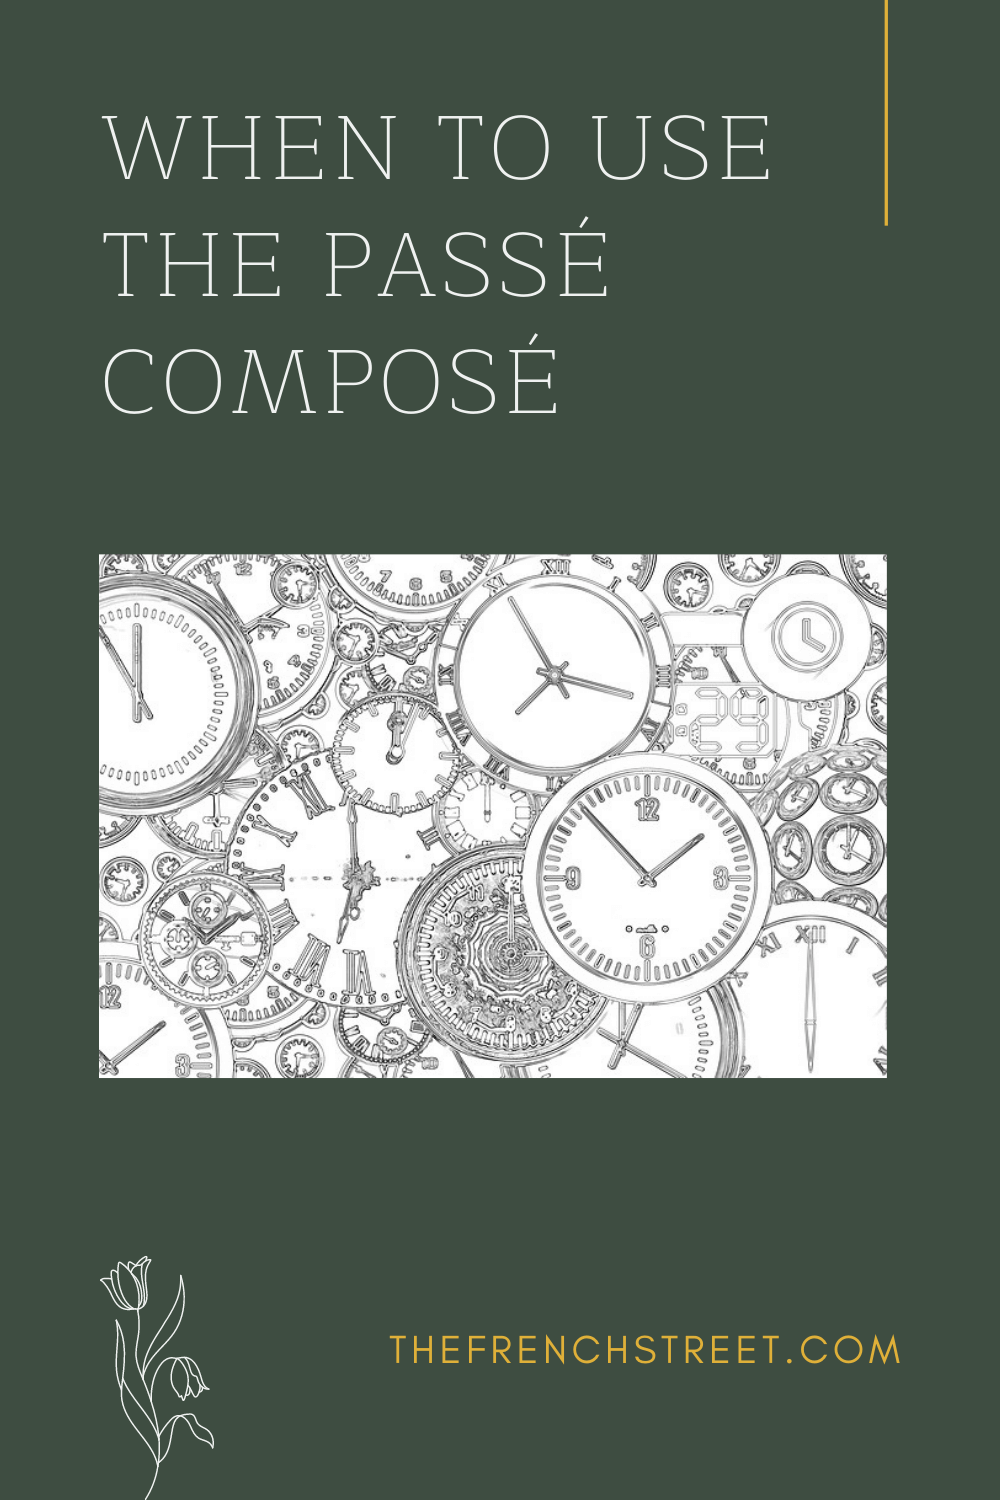 When to use the passe compose